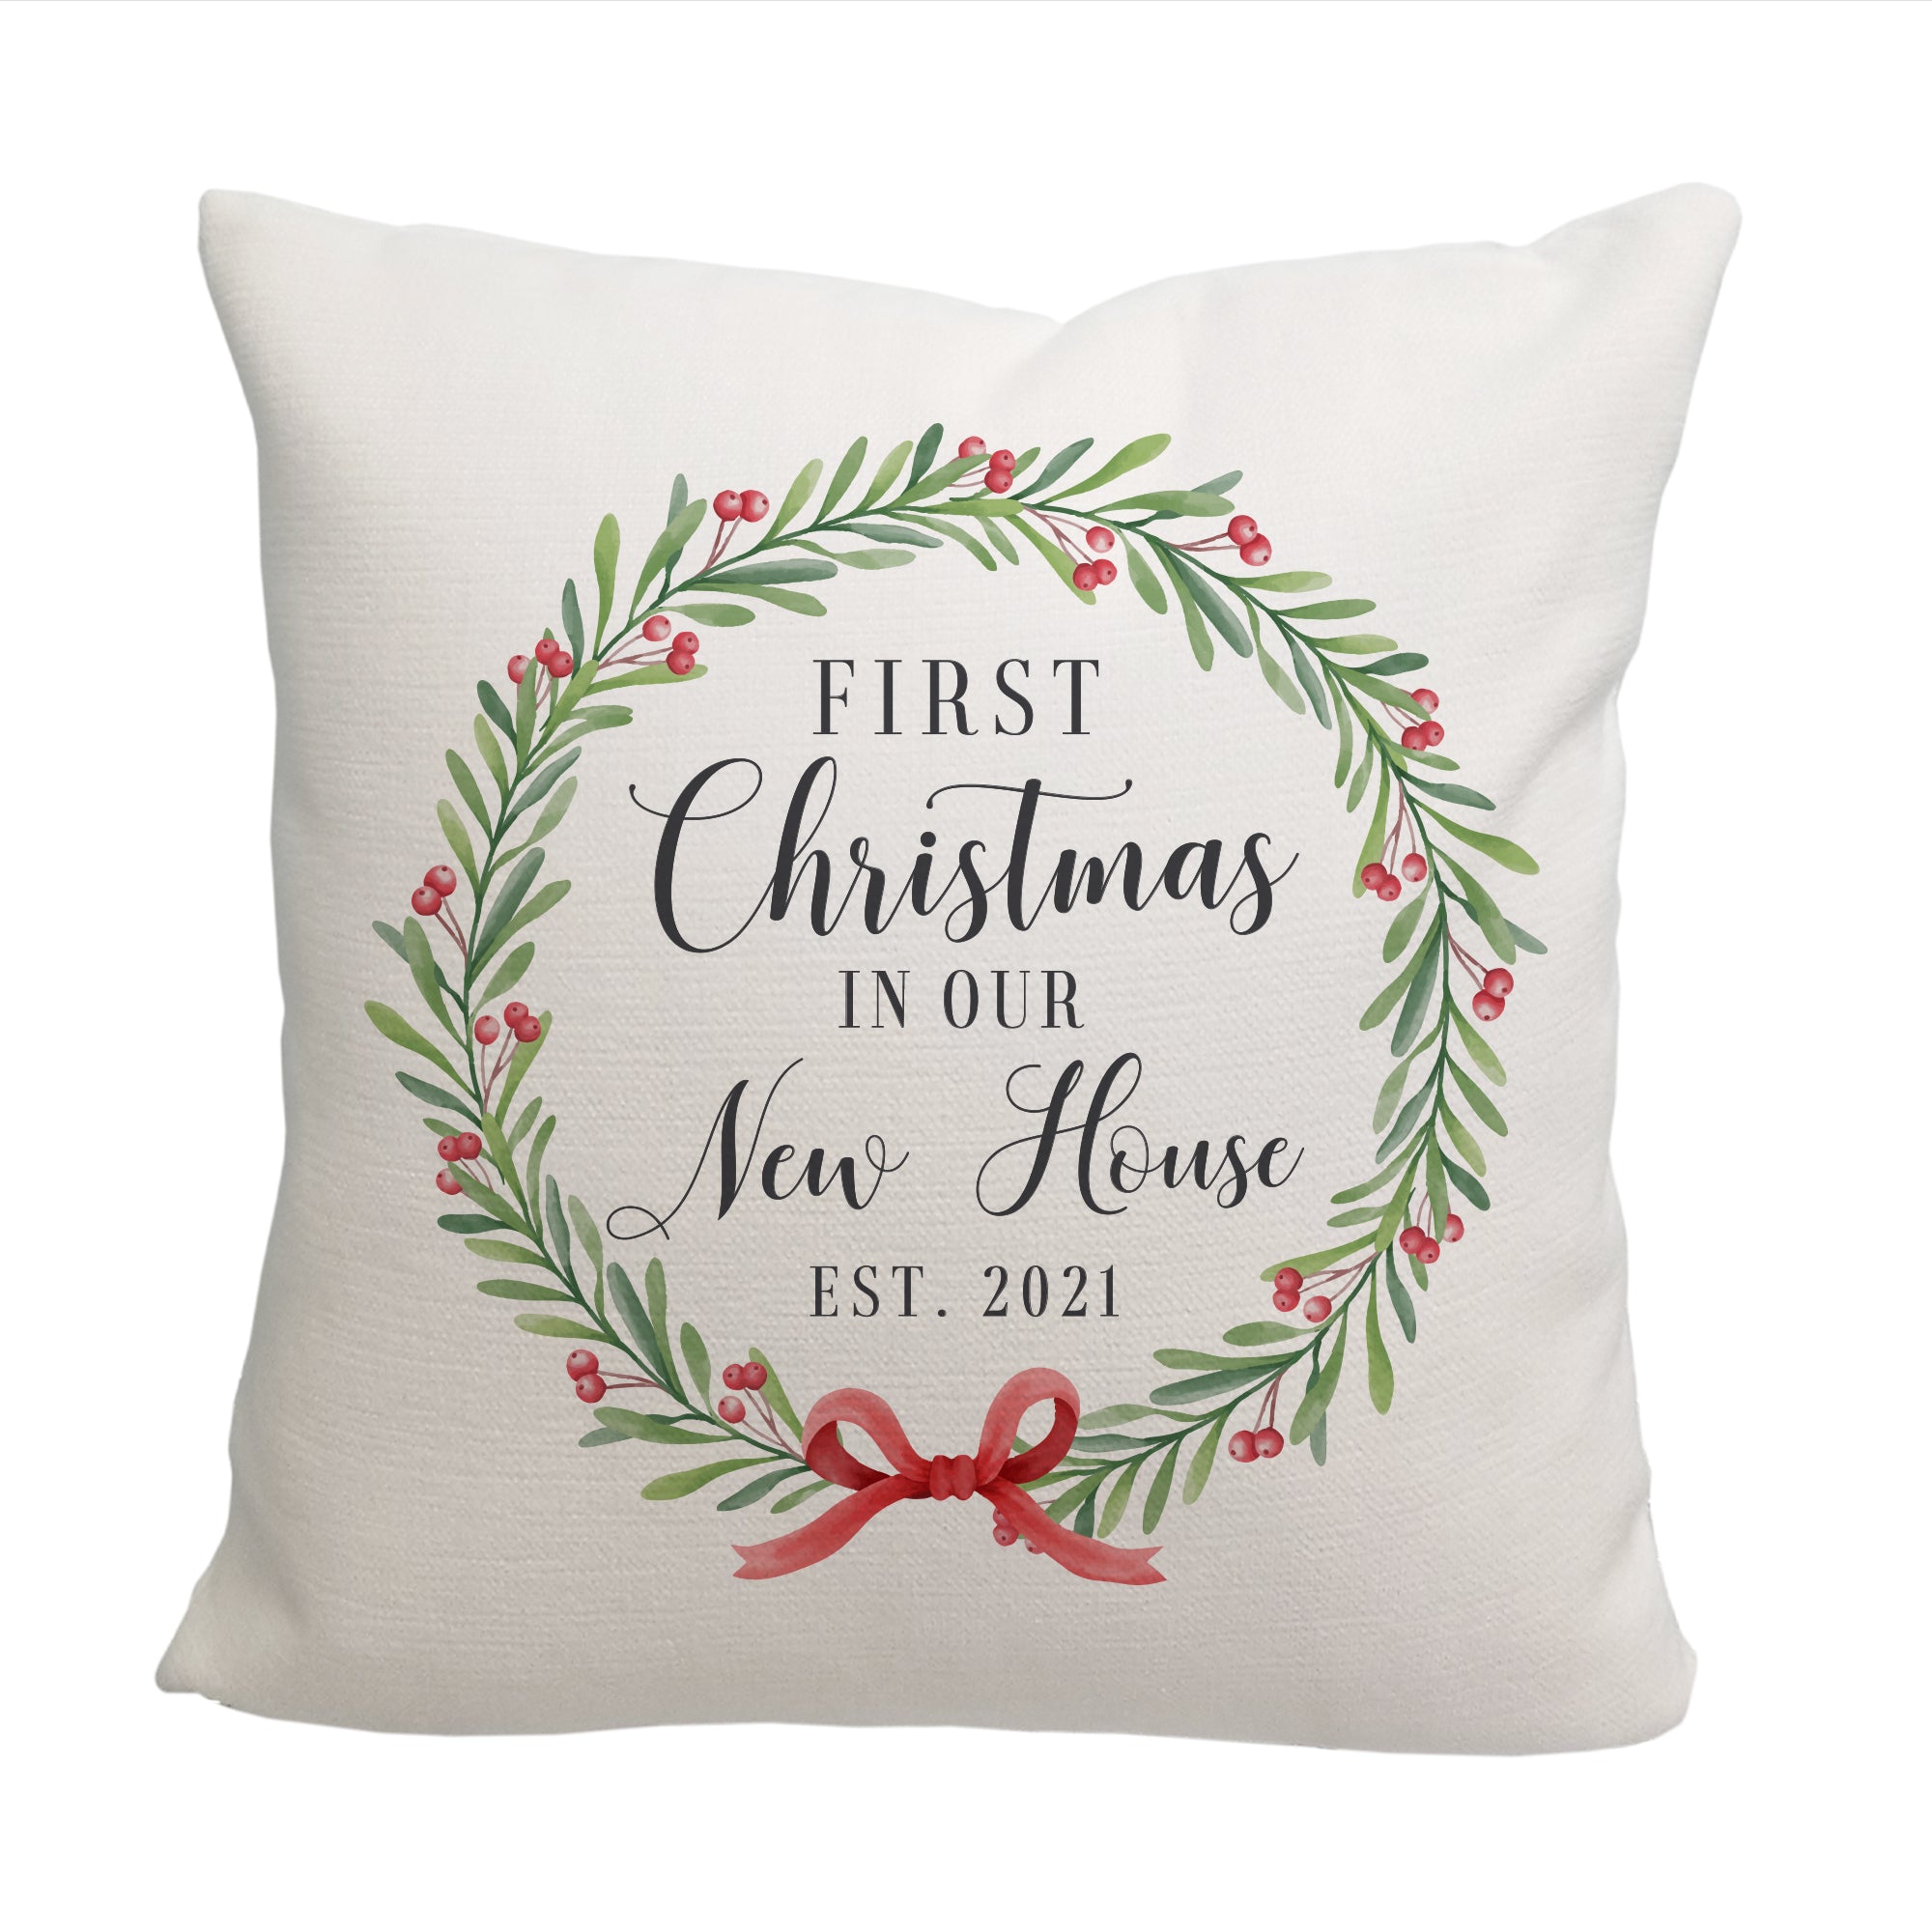 First Christmas in Our New Home Throw Pillow - Cover Only OR Cover with Insert